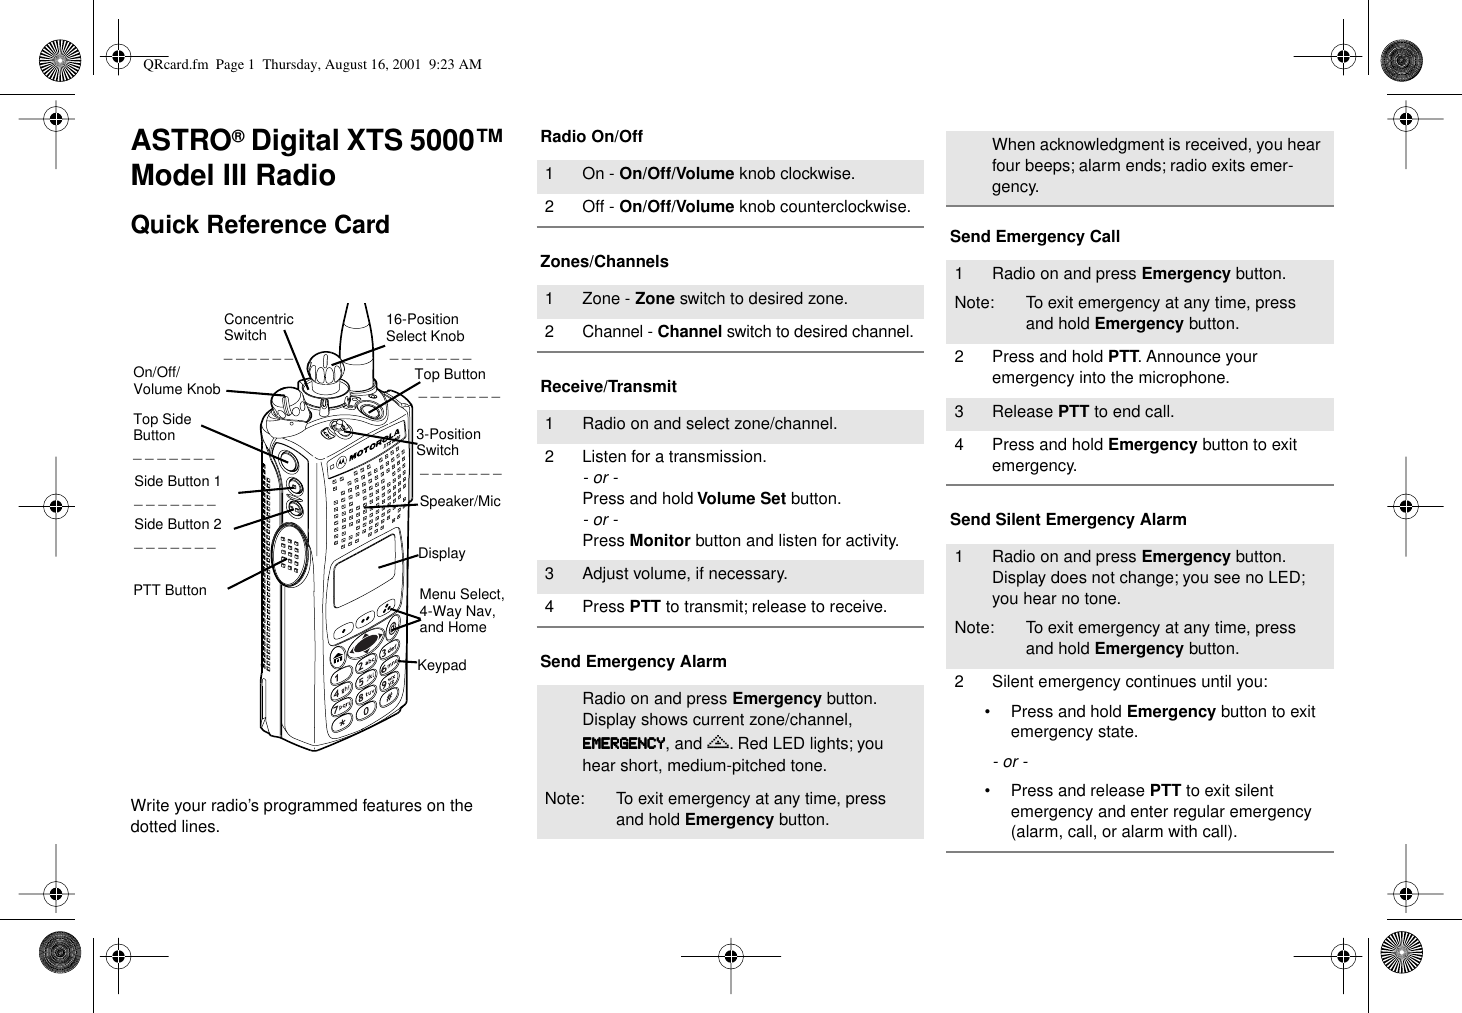  ASTRO ®  Digital XTS 5000™ Model III Radio Quick Reference Card Write your radio’s programmed features on the dotted lines. Radio On/OffZones/ChannelsReceive/TransmitSend Emergency AlarmSend Emergency CallSend Silent Emergency Alarm16-Position Select Knob _ _ _ _ _ _ _Speaker/MicTop Button _ _ _ _ _ _ _Concentric Switch_ _ _ _ _ _ DisplayKeypadMenu Select, 4-Way Nav, and Home Top Side Button_ _ _ _ _ _ _On/Off/Volume KnobSide Button 1_ _ _ _ _ _ _Side Button 2_ _ _ _ _ _ _PTT Button3-Position Switch _ _ _ _ _ _ _ 1 On -  On/Off/Volume  knob clockwise.2 Off -  On/Off/Volume  knob counterclockwise.1 Zone -  Zone  switch to desired zone.2 Channel -  Channel  switch to desired channel.1 Radio on and select zone/channel.2 Listen for a transmission. - or - Press and hold  Volume Set  button. - or - Press  Monitor  button and listen for activity.3 Adjust volume, if necessary.4 Press  PTT  to transmit; release to receive.Radio on and press  Emergency  button. Display shows current zone/channel,   EEEEMMMMEEEERRRRGGGGEEEENNNNCCCCYYYY , and  e . Red LED lights; you hear short, medium-pitched tone.Note: To exit emergency at any time, press and hold  Emergency  button.When acknowledgment is received, you hear four beeps; alarm ends; radio exits emer-gency.1 Radio on and press  Emergency  button.Note: To exit emergency at any time, press and hold  Emergency  button.2 Press and hold  PTT . Announce your emergency into the microphone.3 Release  PTT  to end call.4 Press and hold  Emergency  button to exit emergency. 1 Radio on and press  Emergency  button. Display does not change; you see no LED; you hear no tone.Note: To exit emergency at any time, press and hold  Emergency  button.2 Silent emergency continues until you:• Press and hold  Emergency  button to exit emergency state. - or - • Press and release  PTT  to exit silent emergency and enter regular emergency (alarm, call, or alarm with call). QRcard.fm  Page 1  Thursday, August 16, 2001  9:23 AM